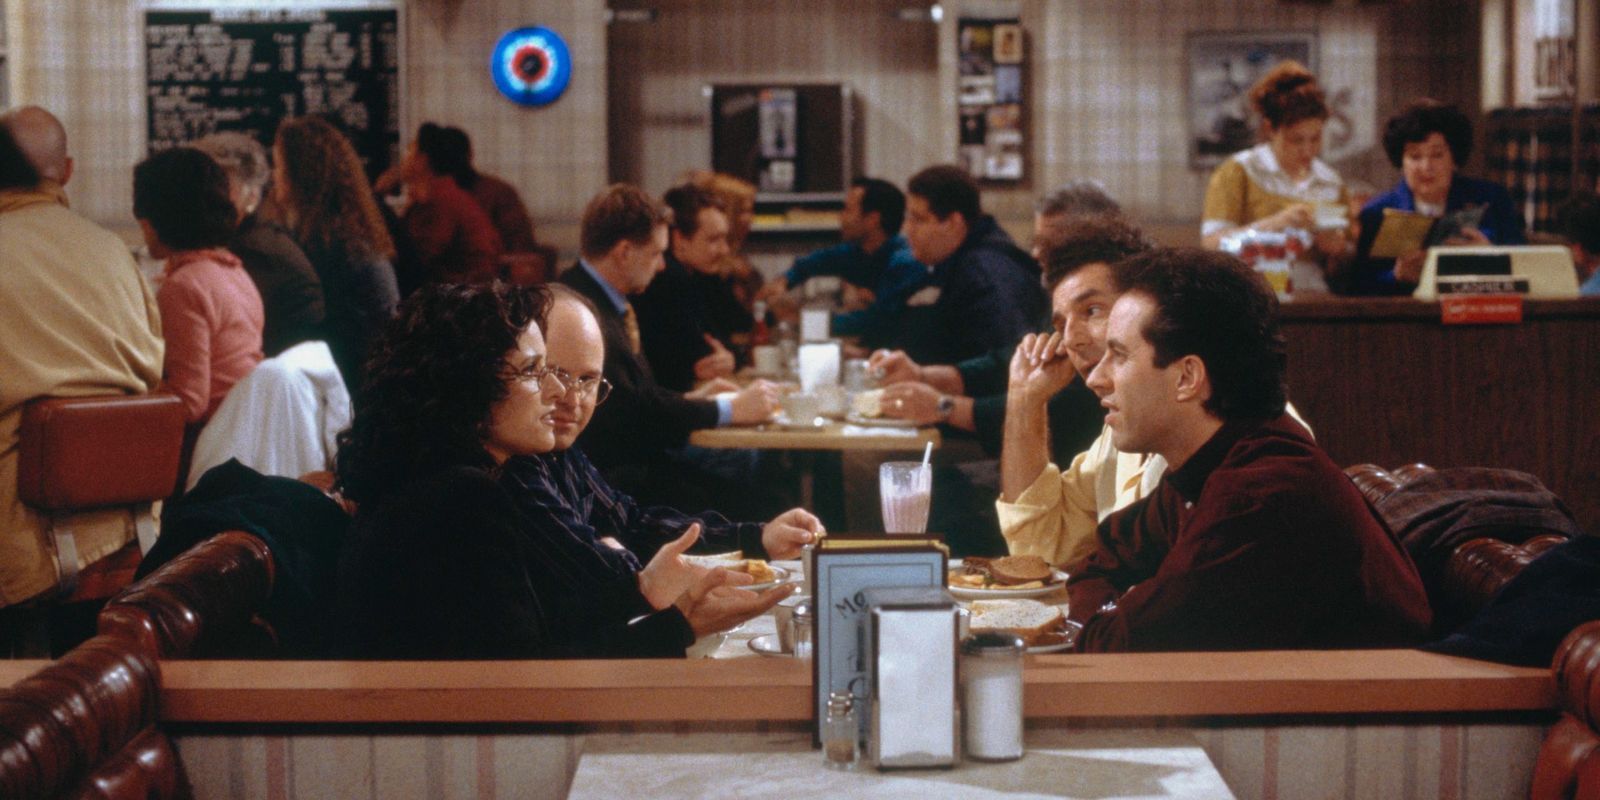 The Seinfeld Gang at Monk's Cafe.